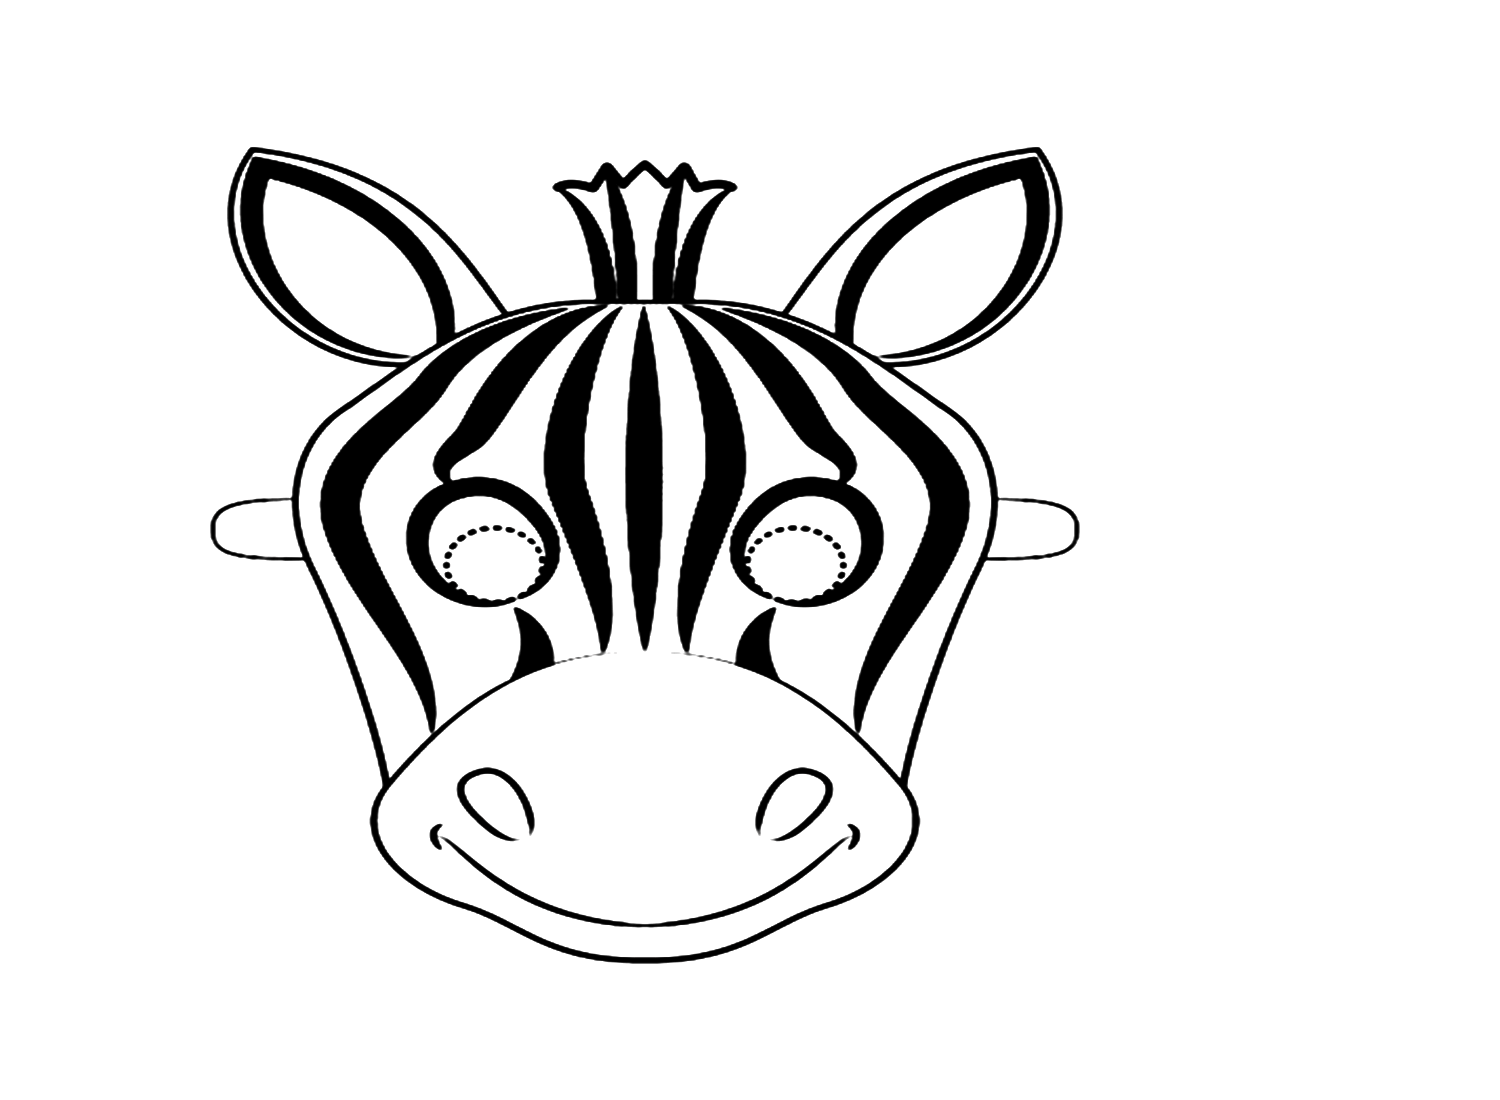 Zebra Coloring Pages - Coloring Pages For Kids And Adults